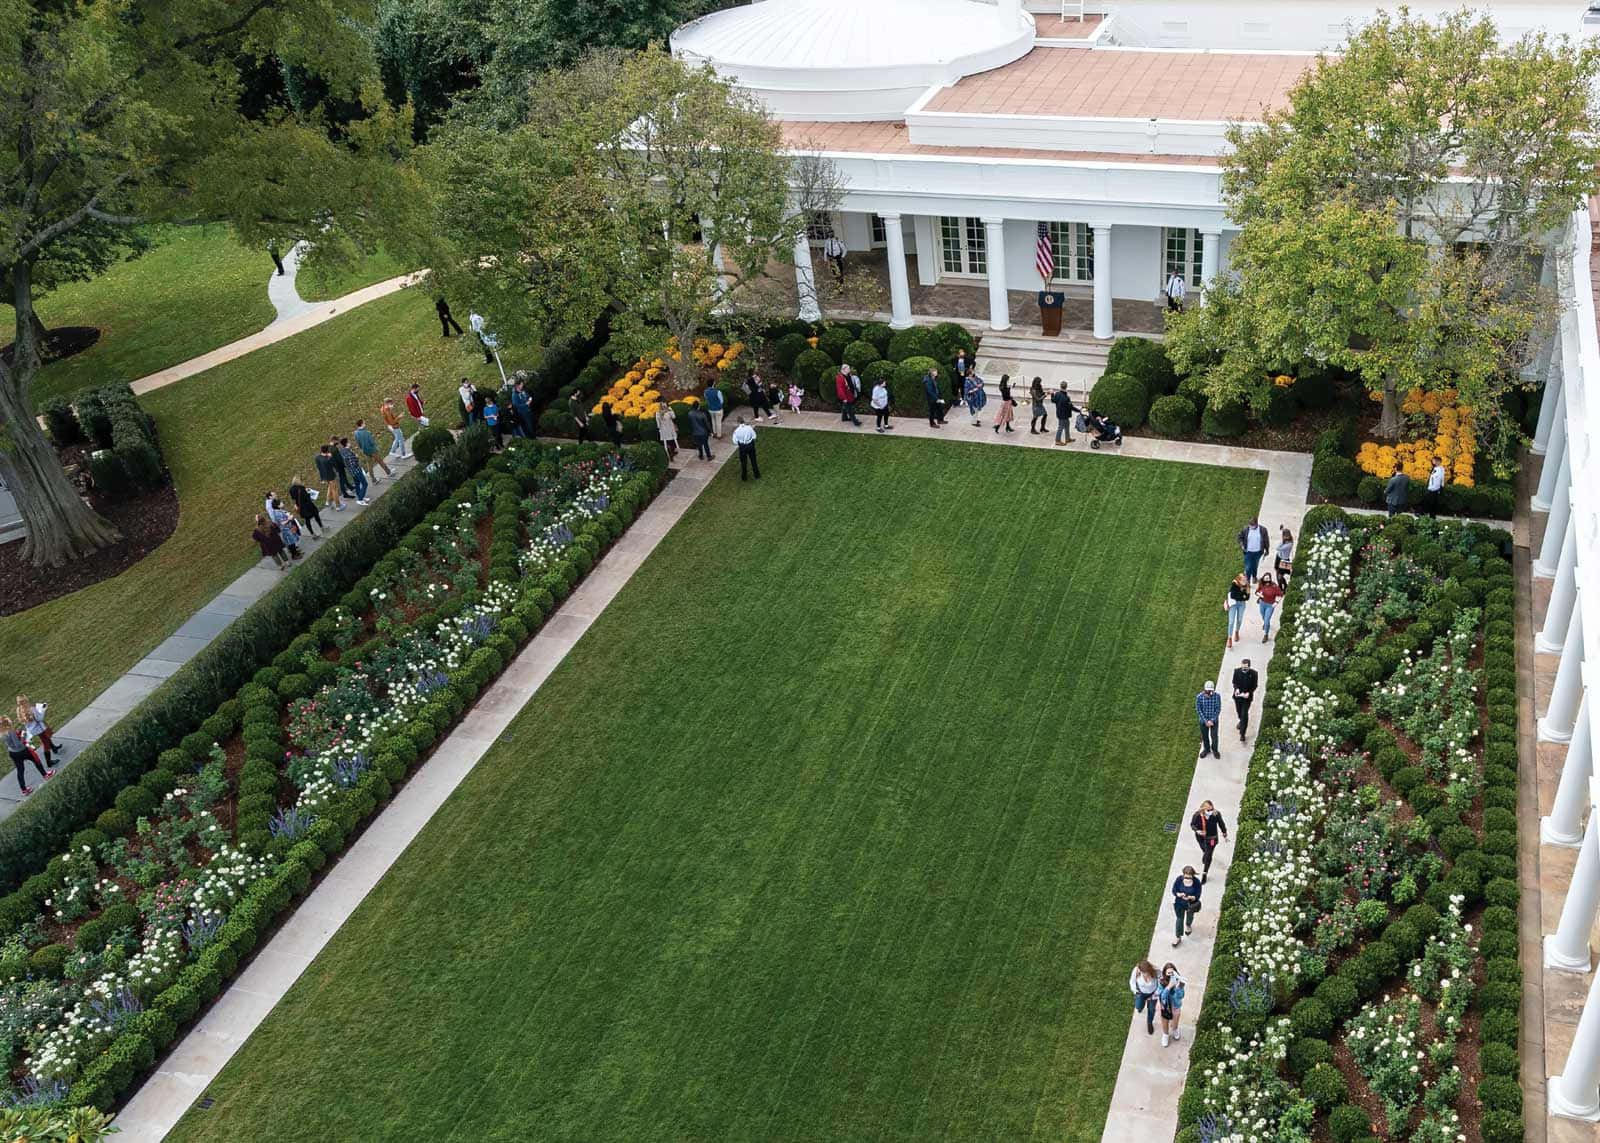 The White House Garden Is A Large Lawn With People Walking Around